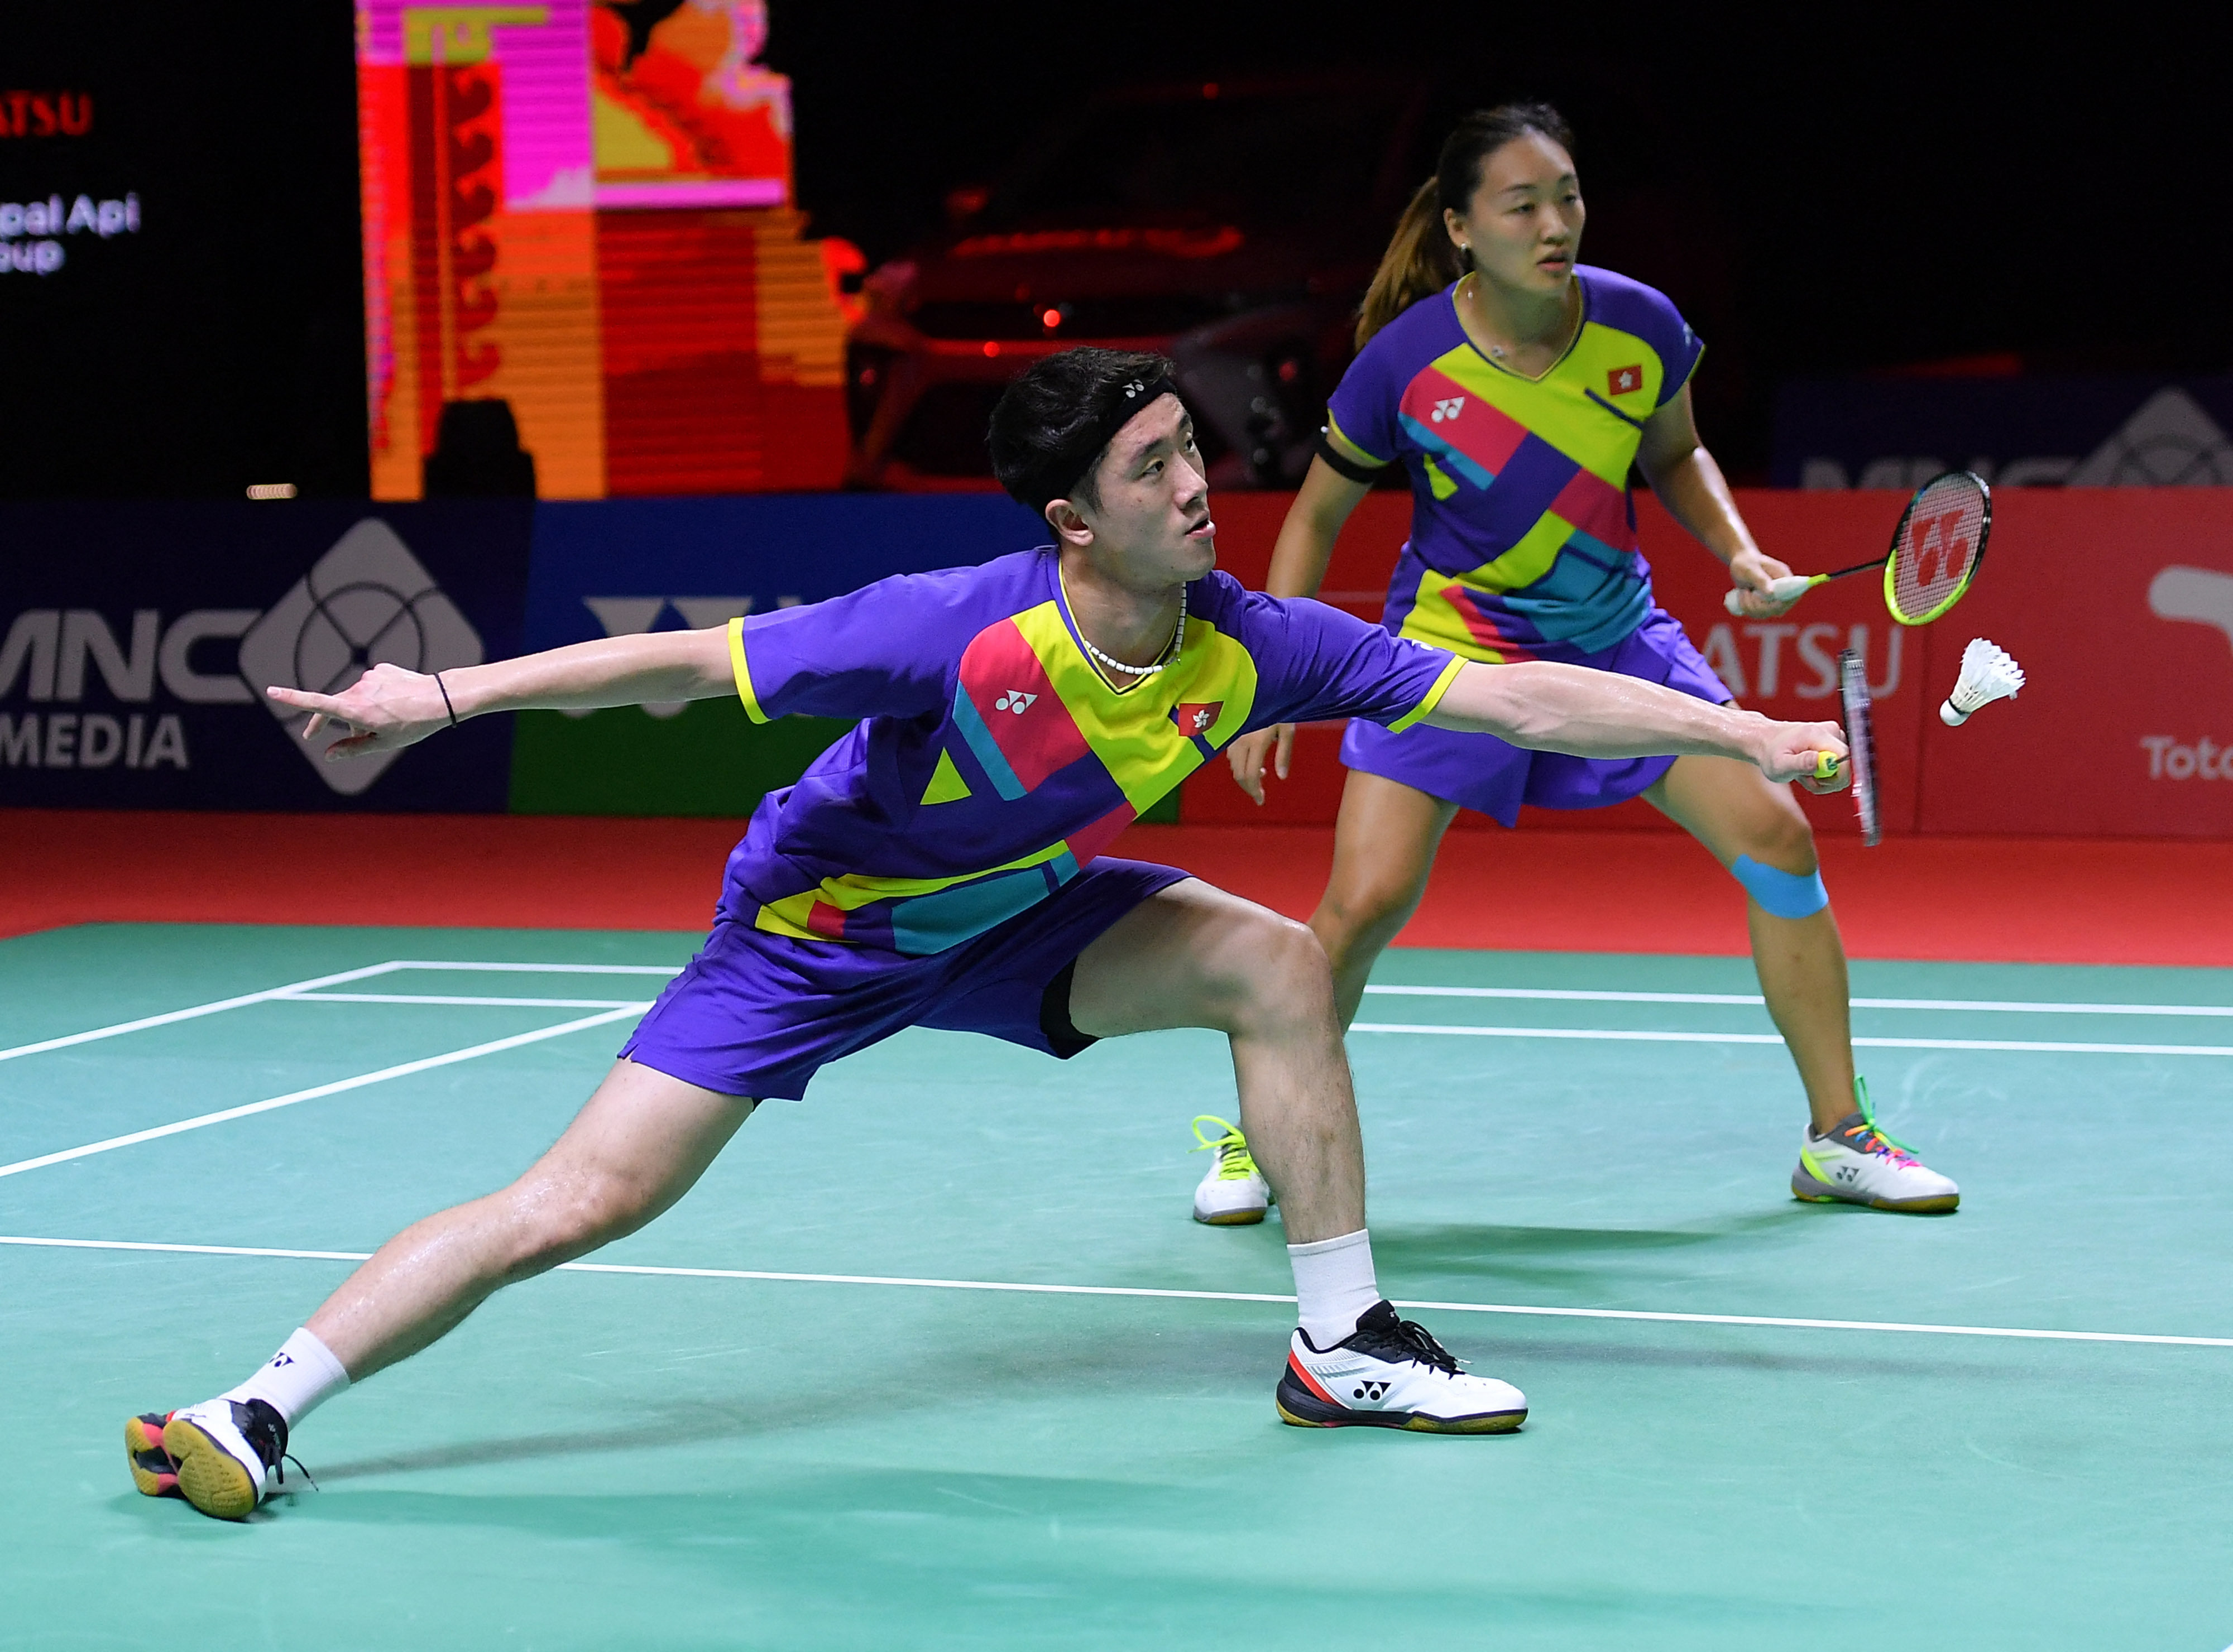 tilpasningsevne Misvisende fisk Manila is great unknown for Hong Kong mixed doubles duo as Asia  Championships spark change of plan | South China Morning Post